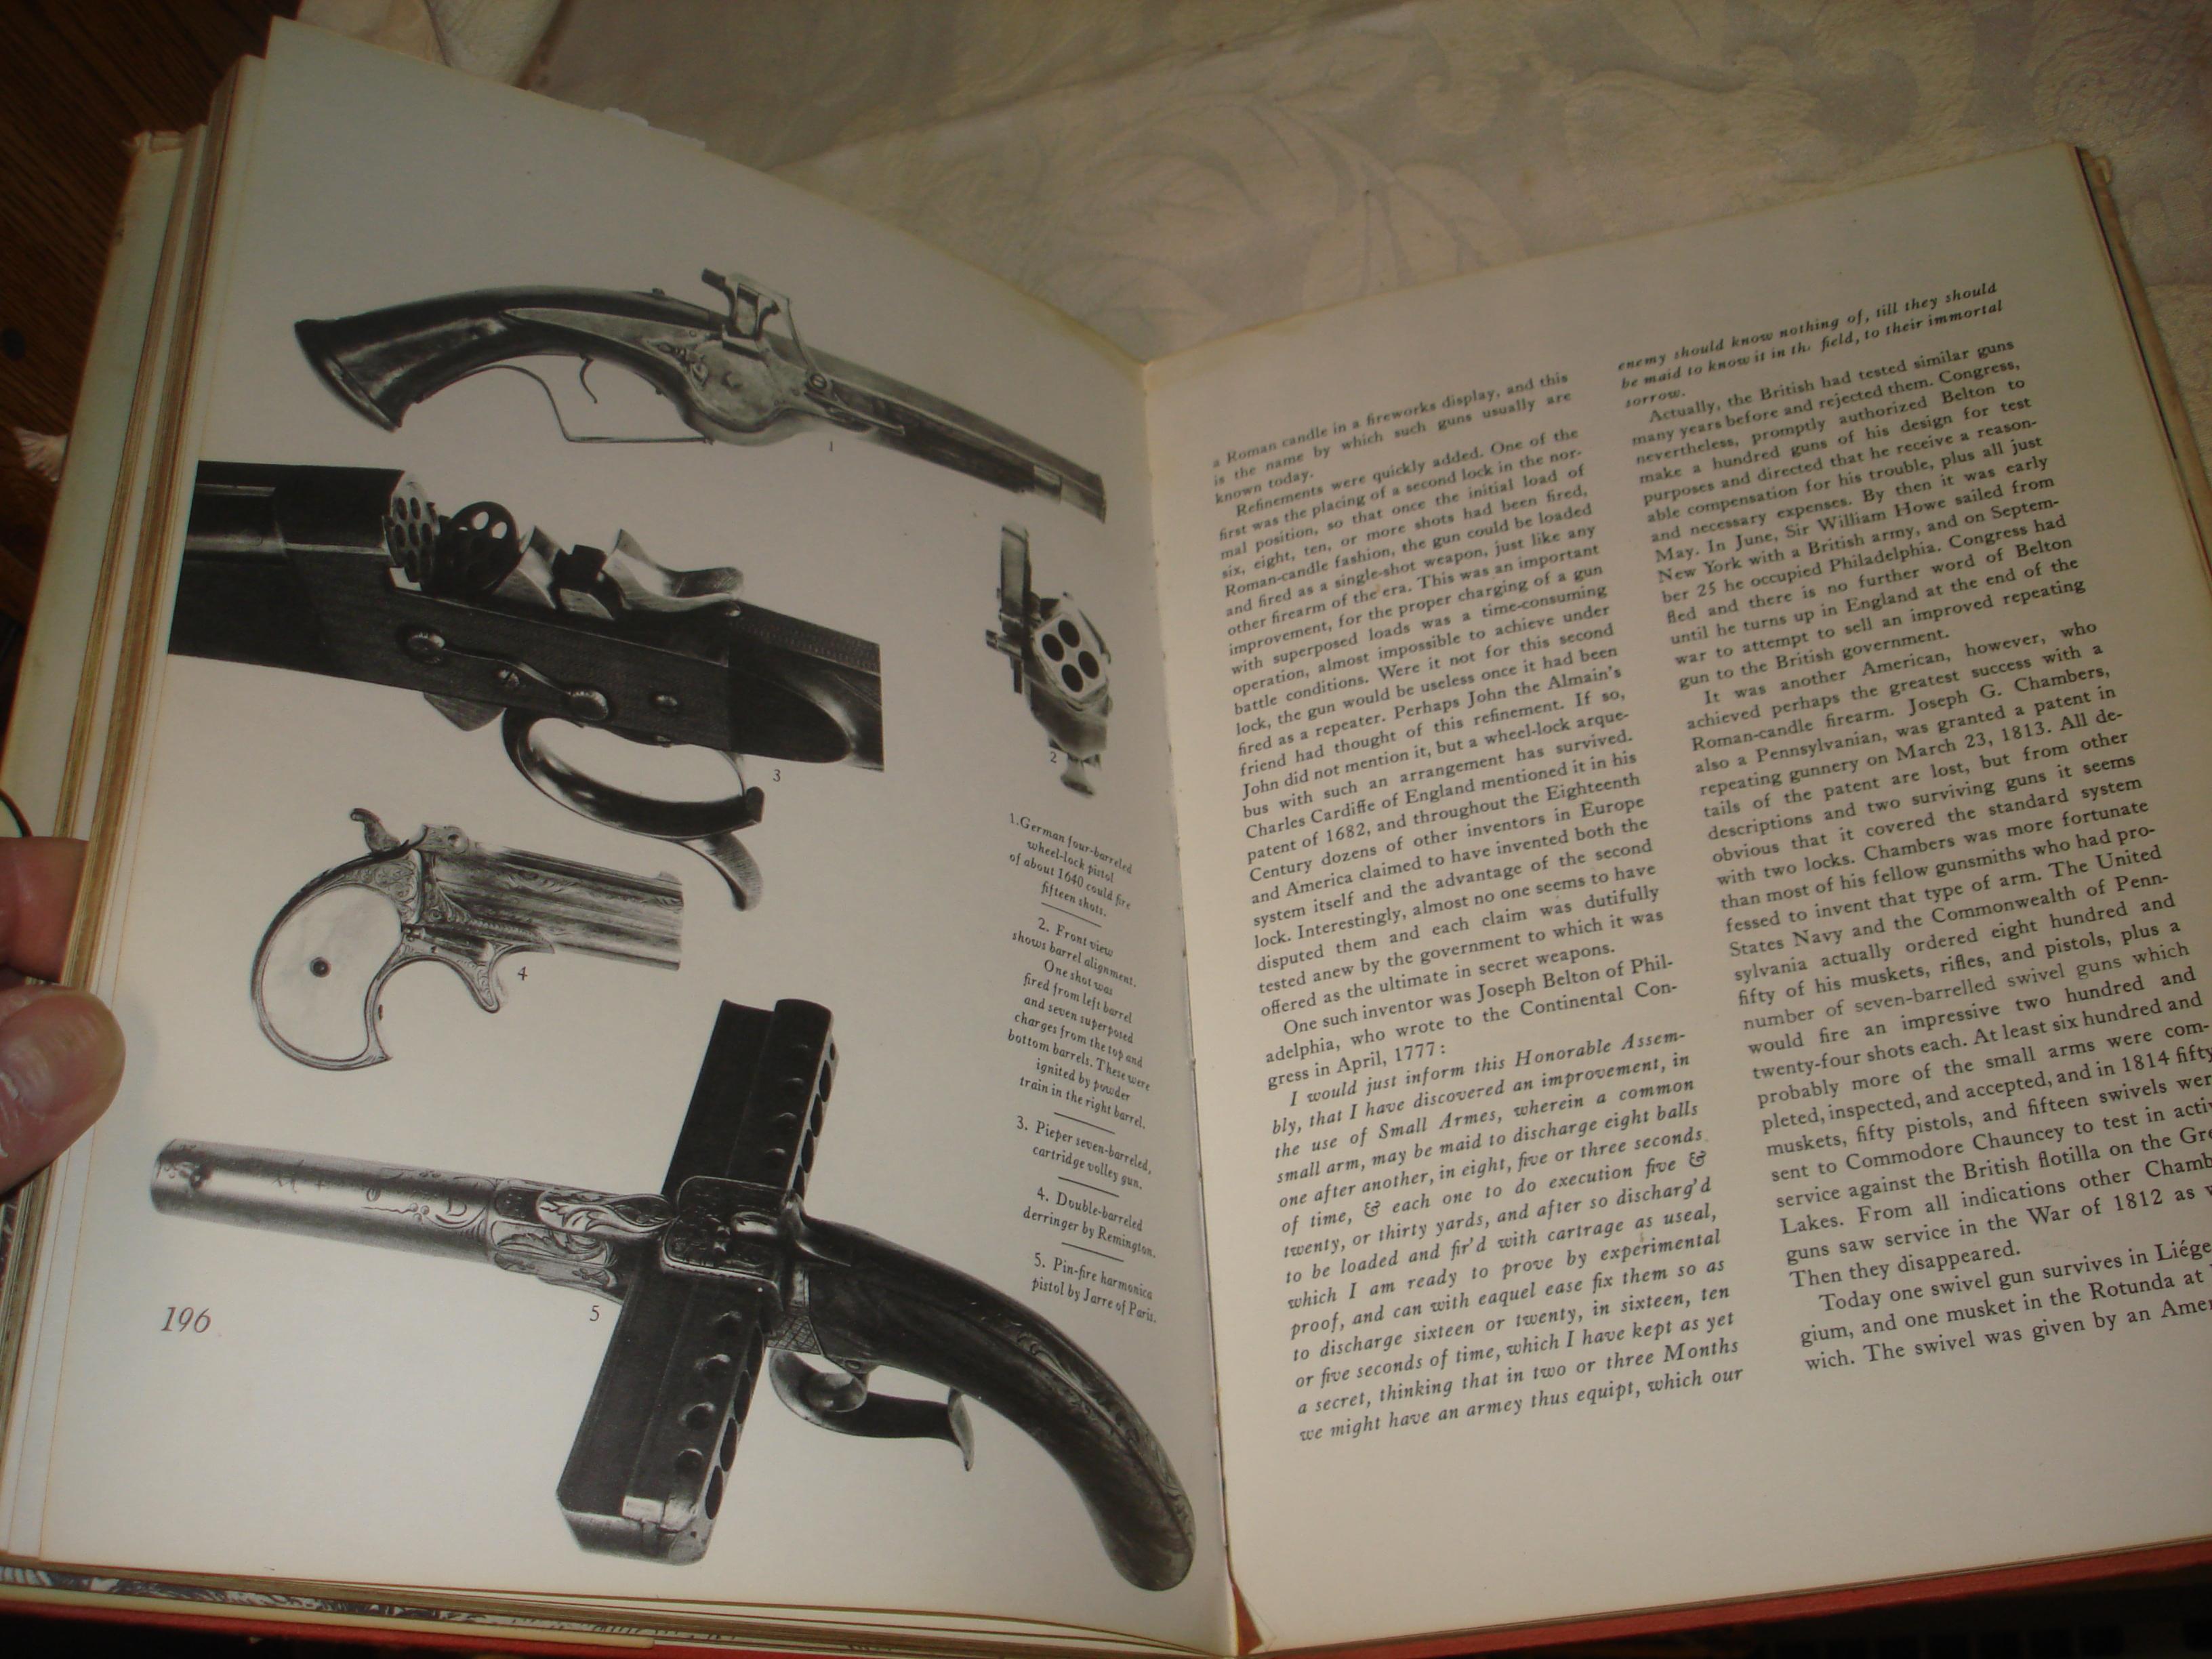 THE BOOK OF GUNS by HAROLD L. PETERSON